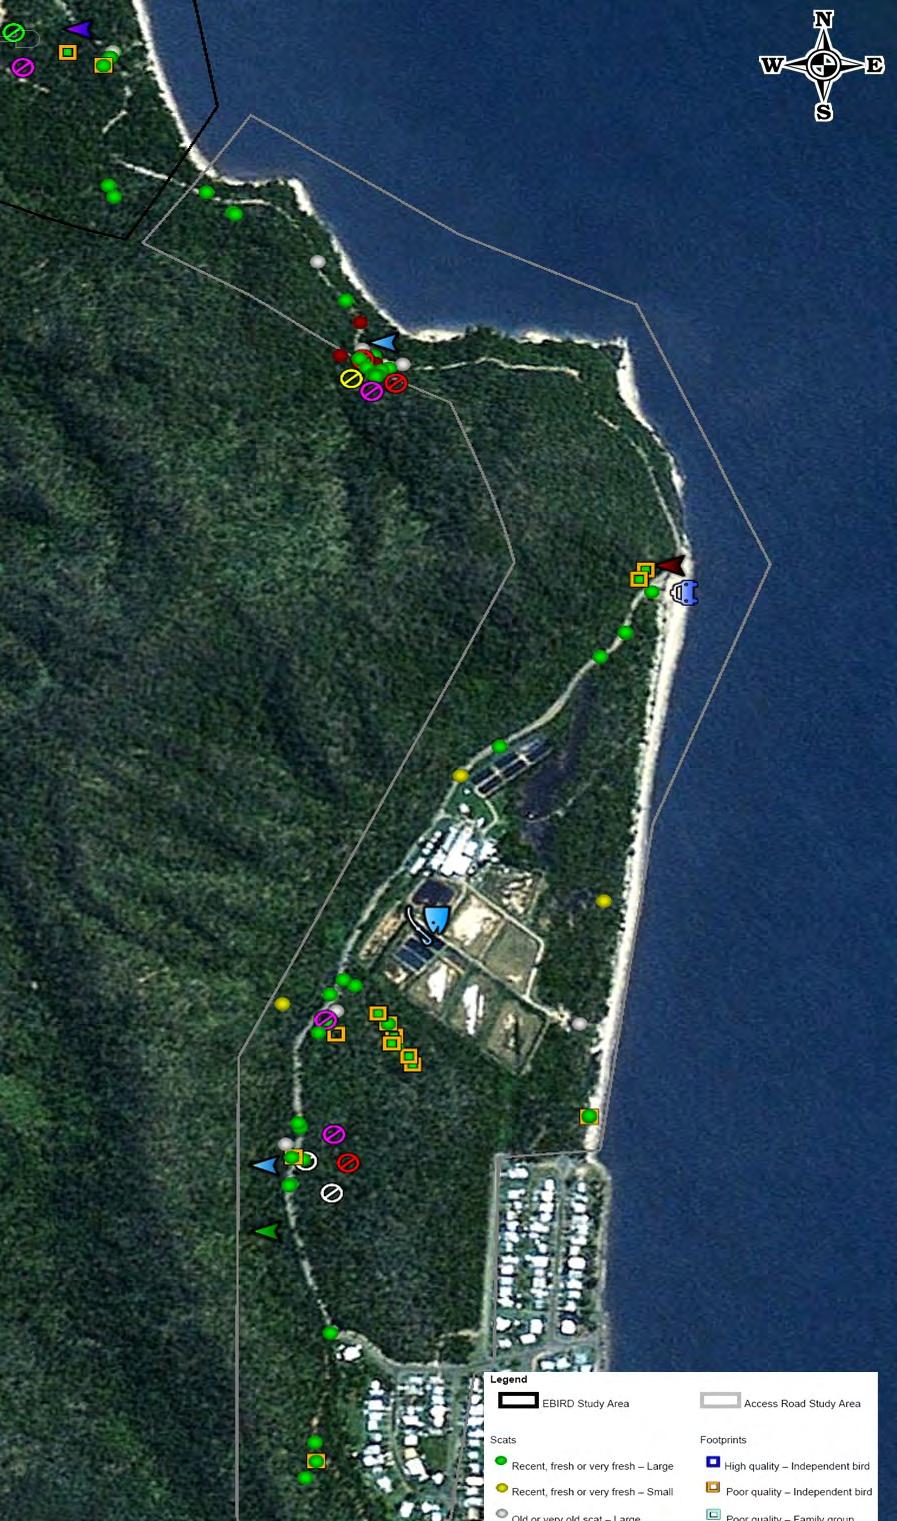 0 100 metres 300 500 PROJECT: Cassowary Survey at the Proposed Ella Bay JOB NO: 340005 Integrated